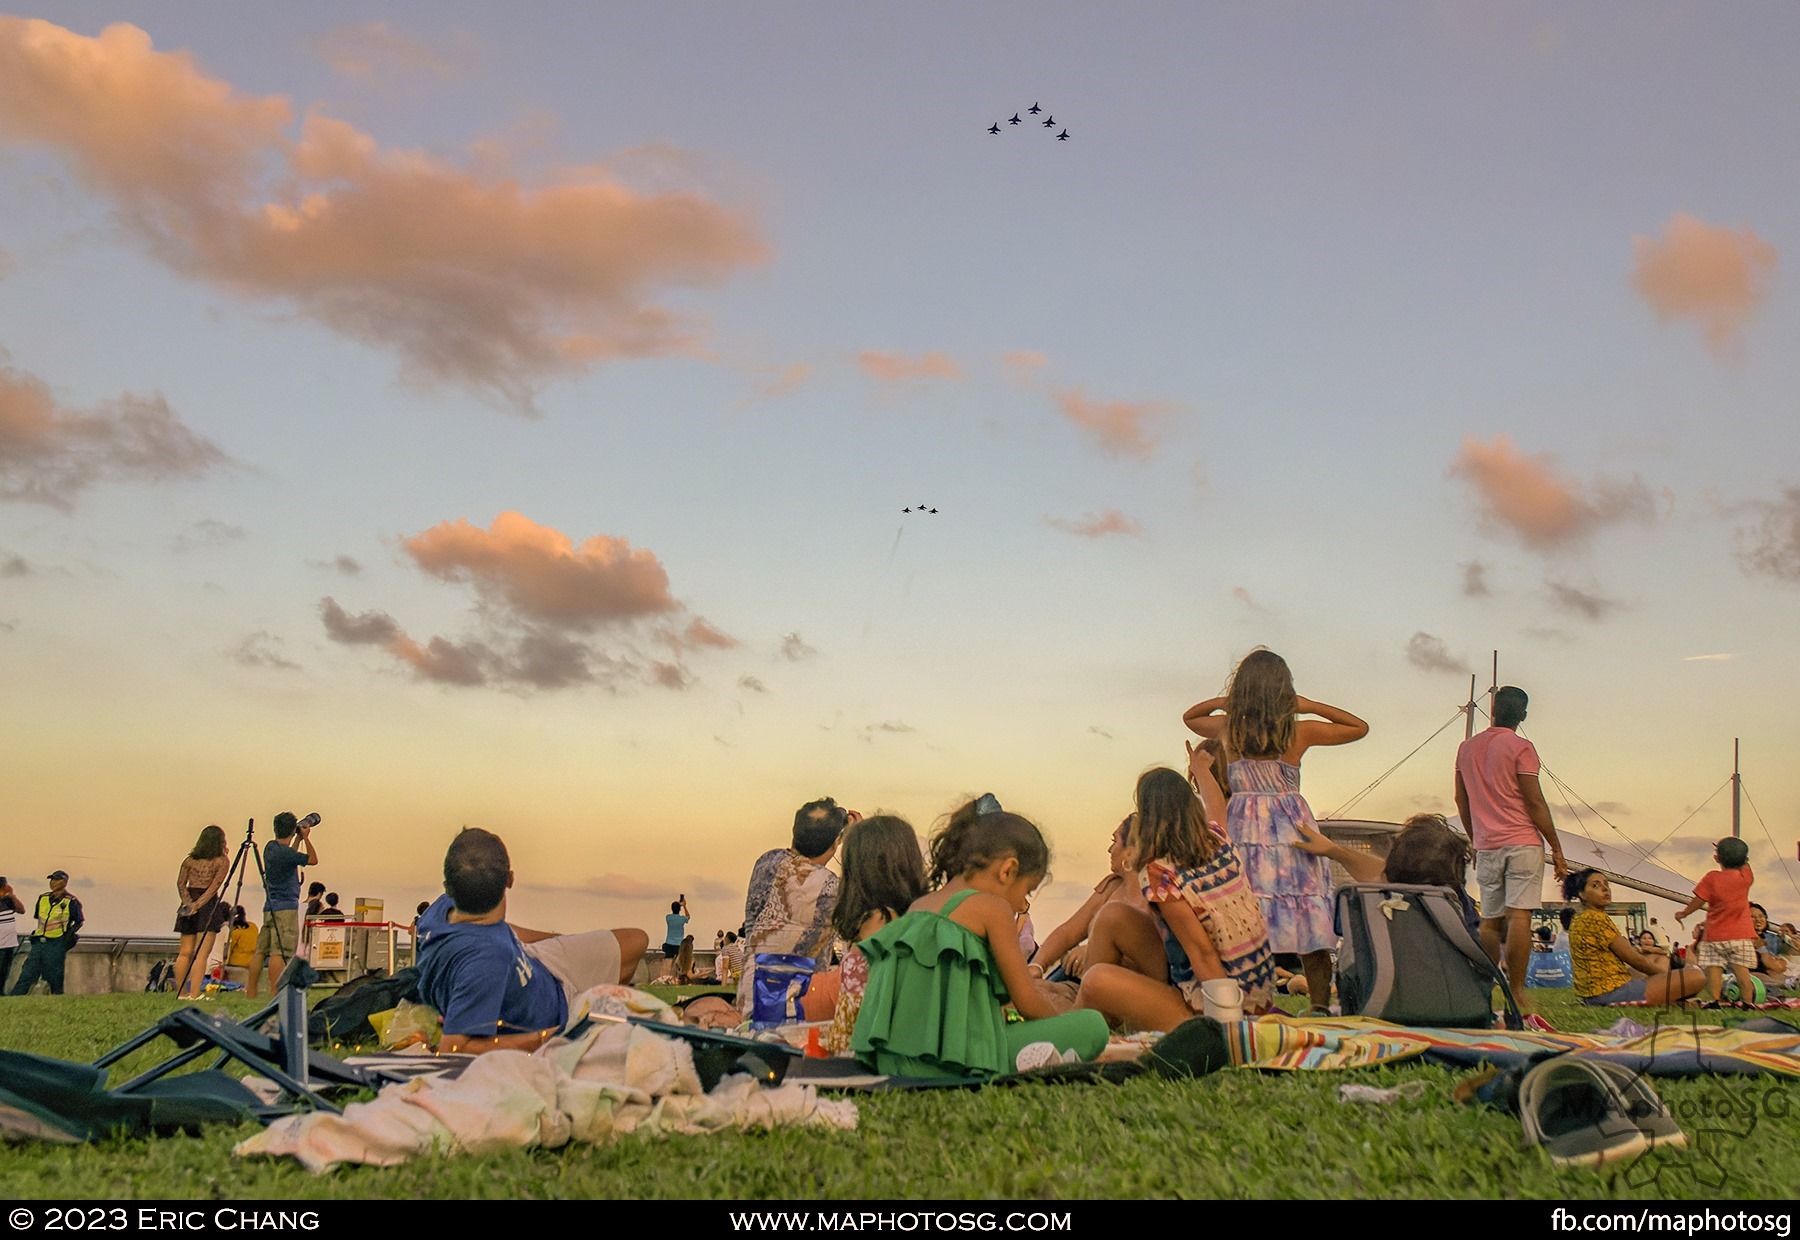 The 6 ship F-16 and 3 ship F-15SG flies over Marina Barrage, to the delight of families enjoying their picnics.